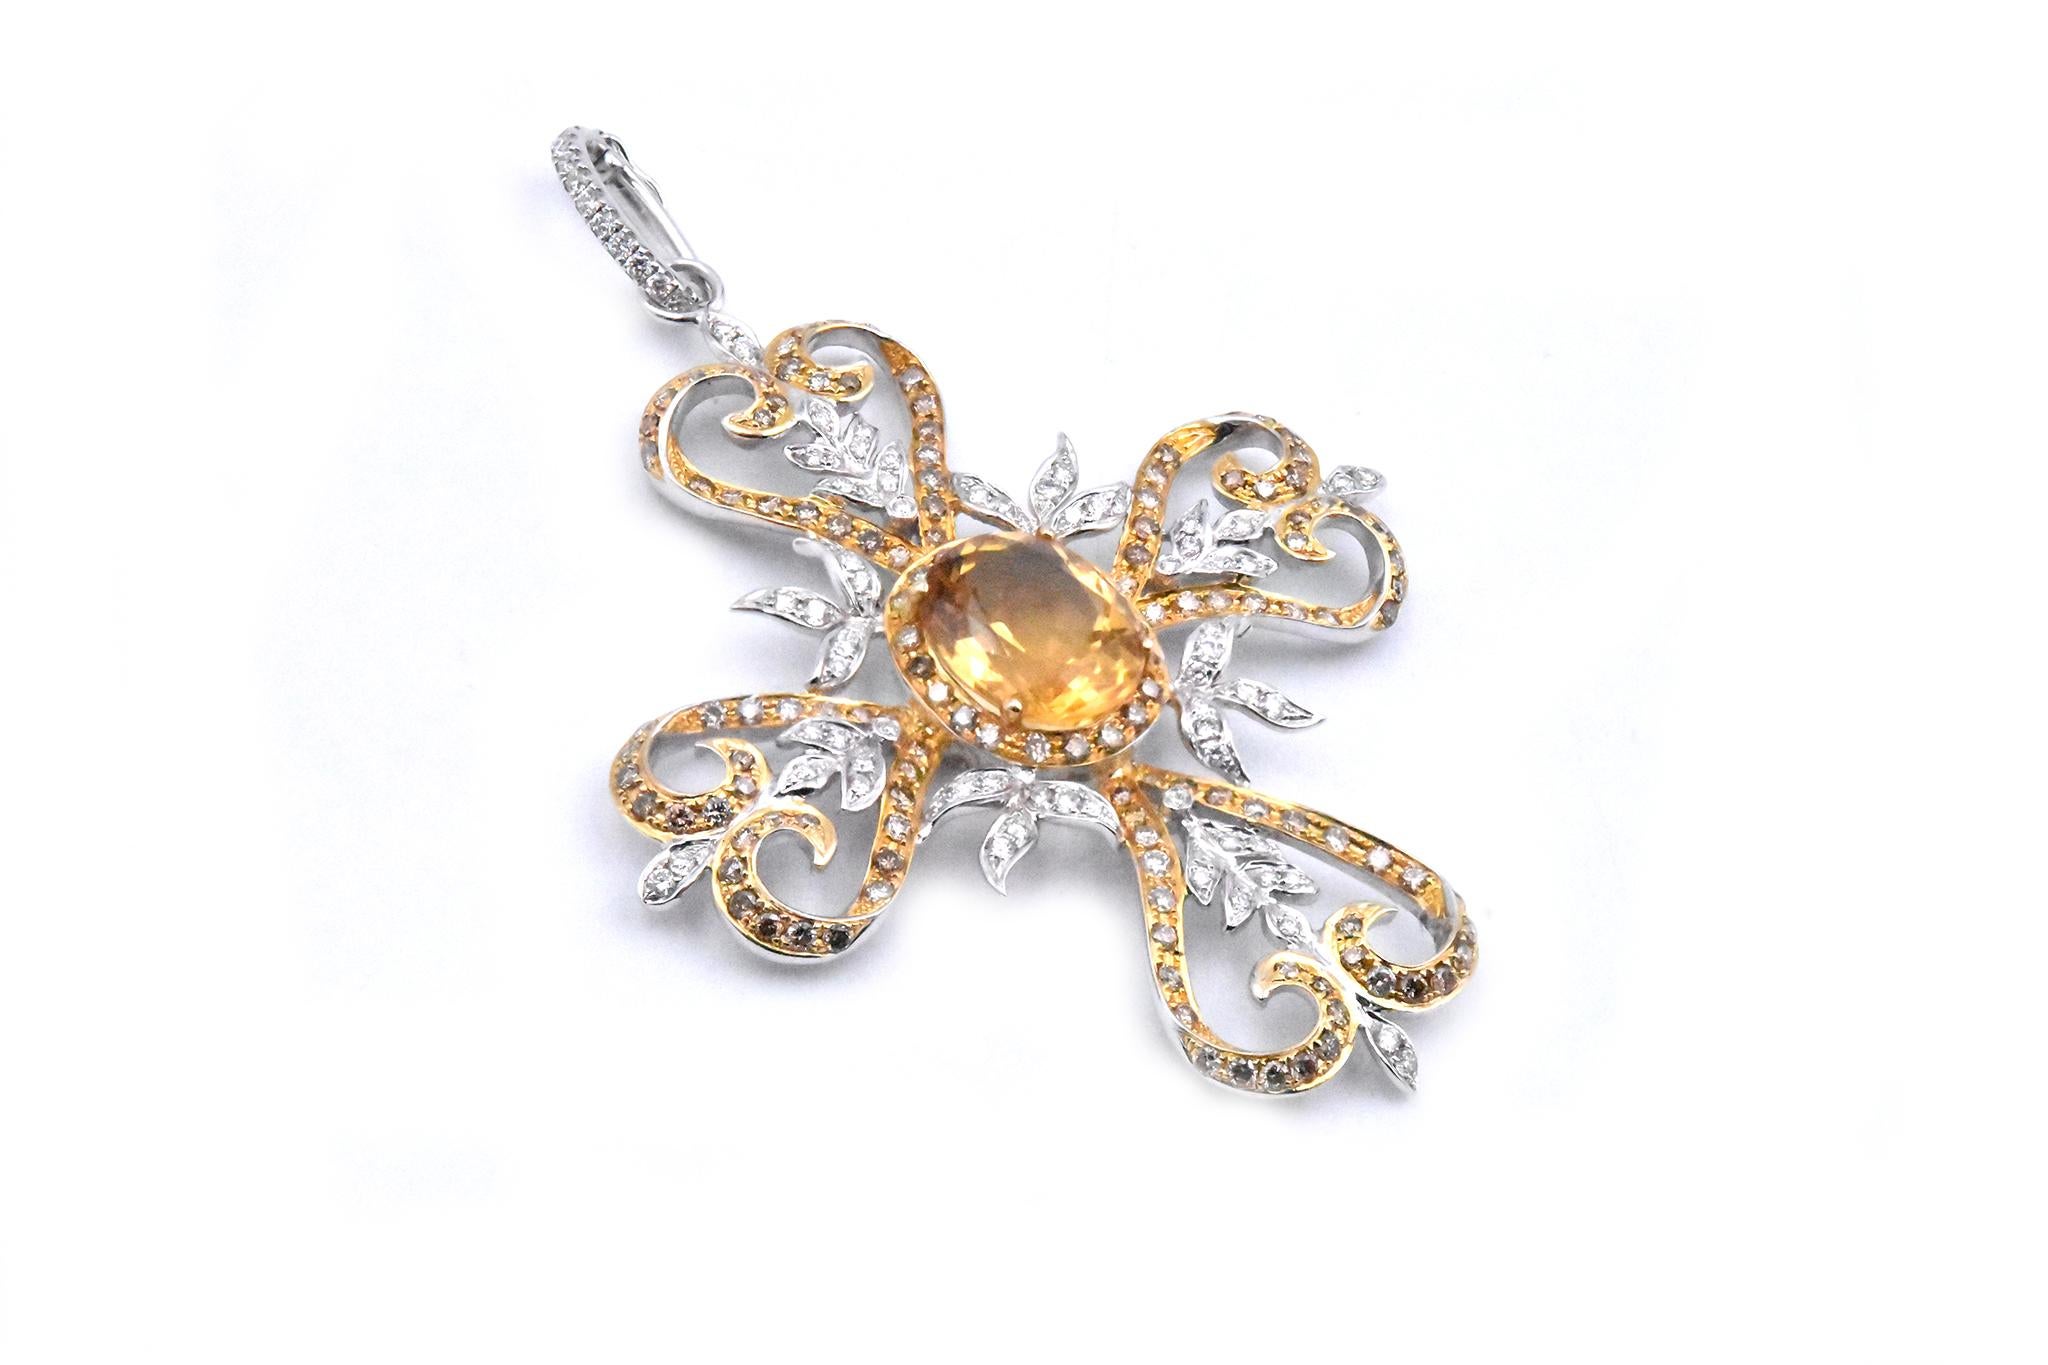 Designer: custom
Material: 18K yellow and white gold
Diamonds: 138 round cut = 1.89cttw
Color: champagne
Diamond: 74 round cut = .61cttw 
Color: G
Clarity:  SI1
Dimensions: the pendant measures 71.75 X 49.15 mm
Weight: 13.69 grams
